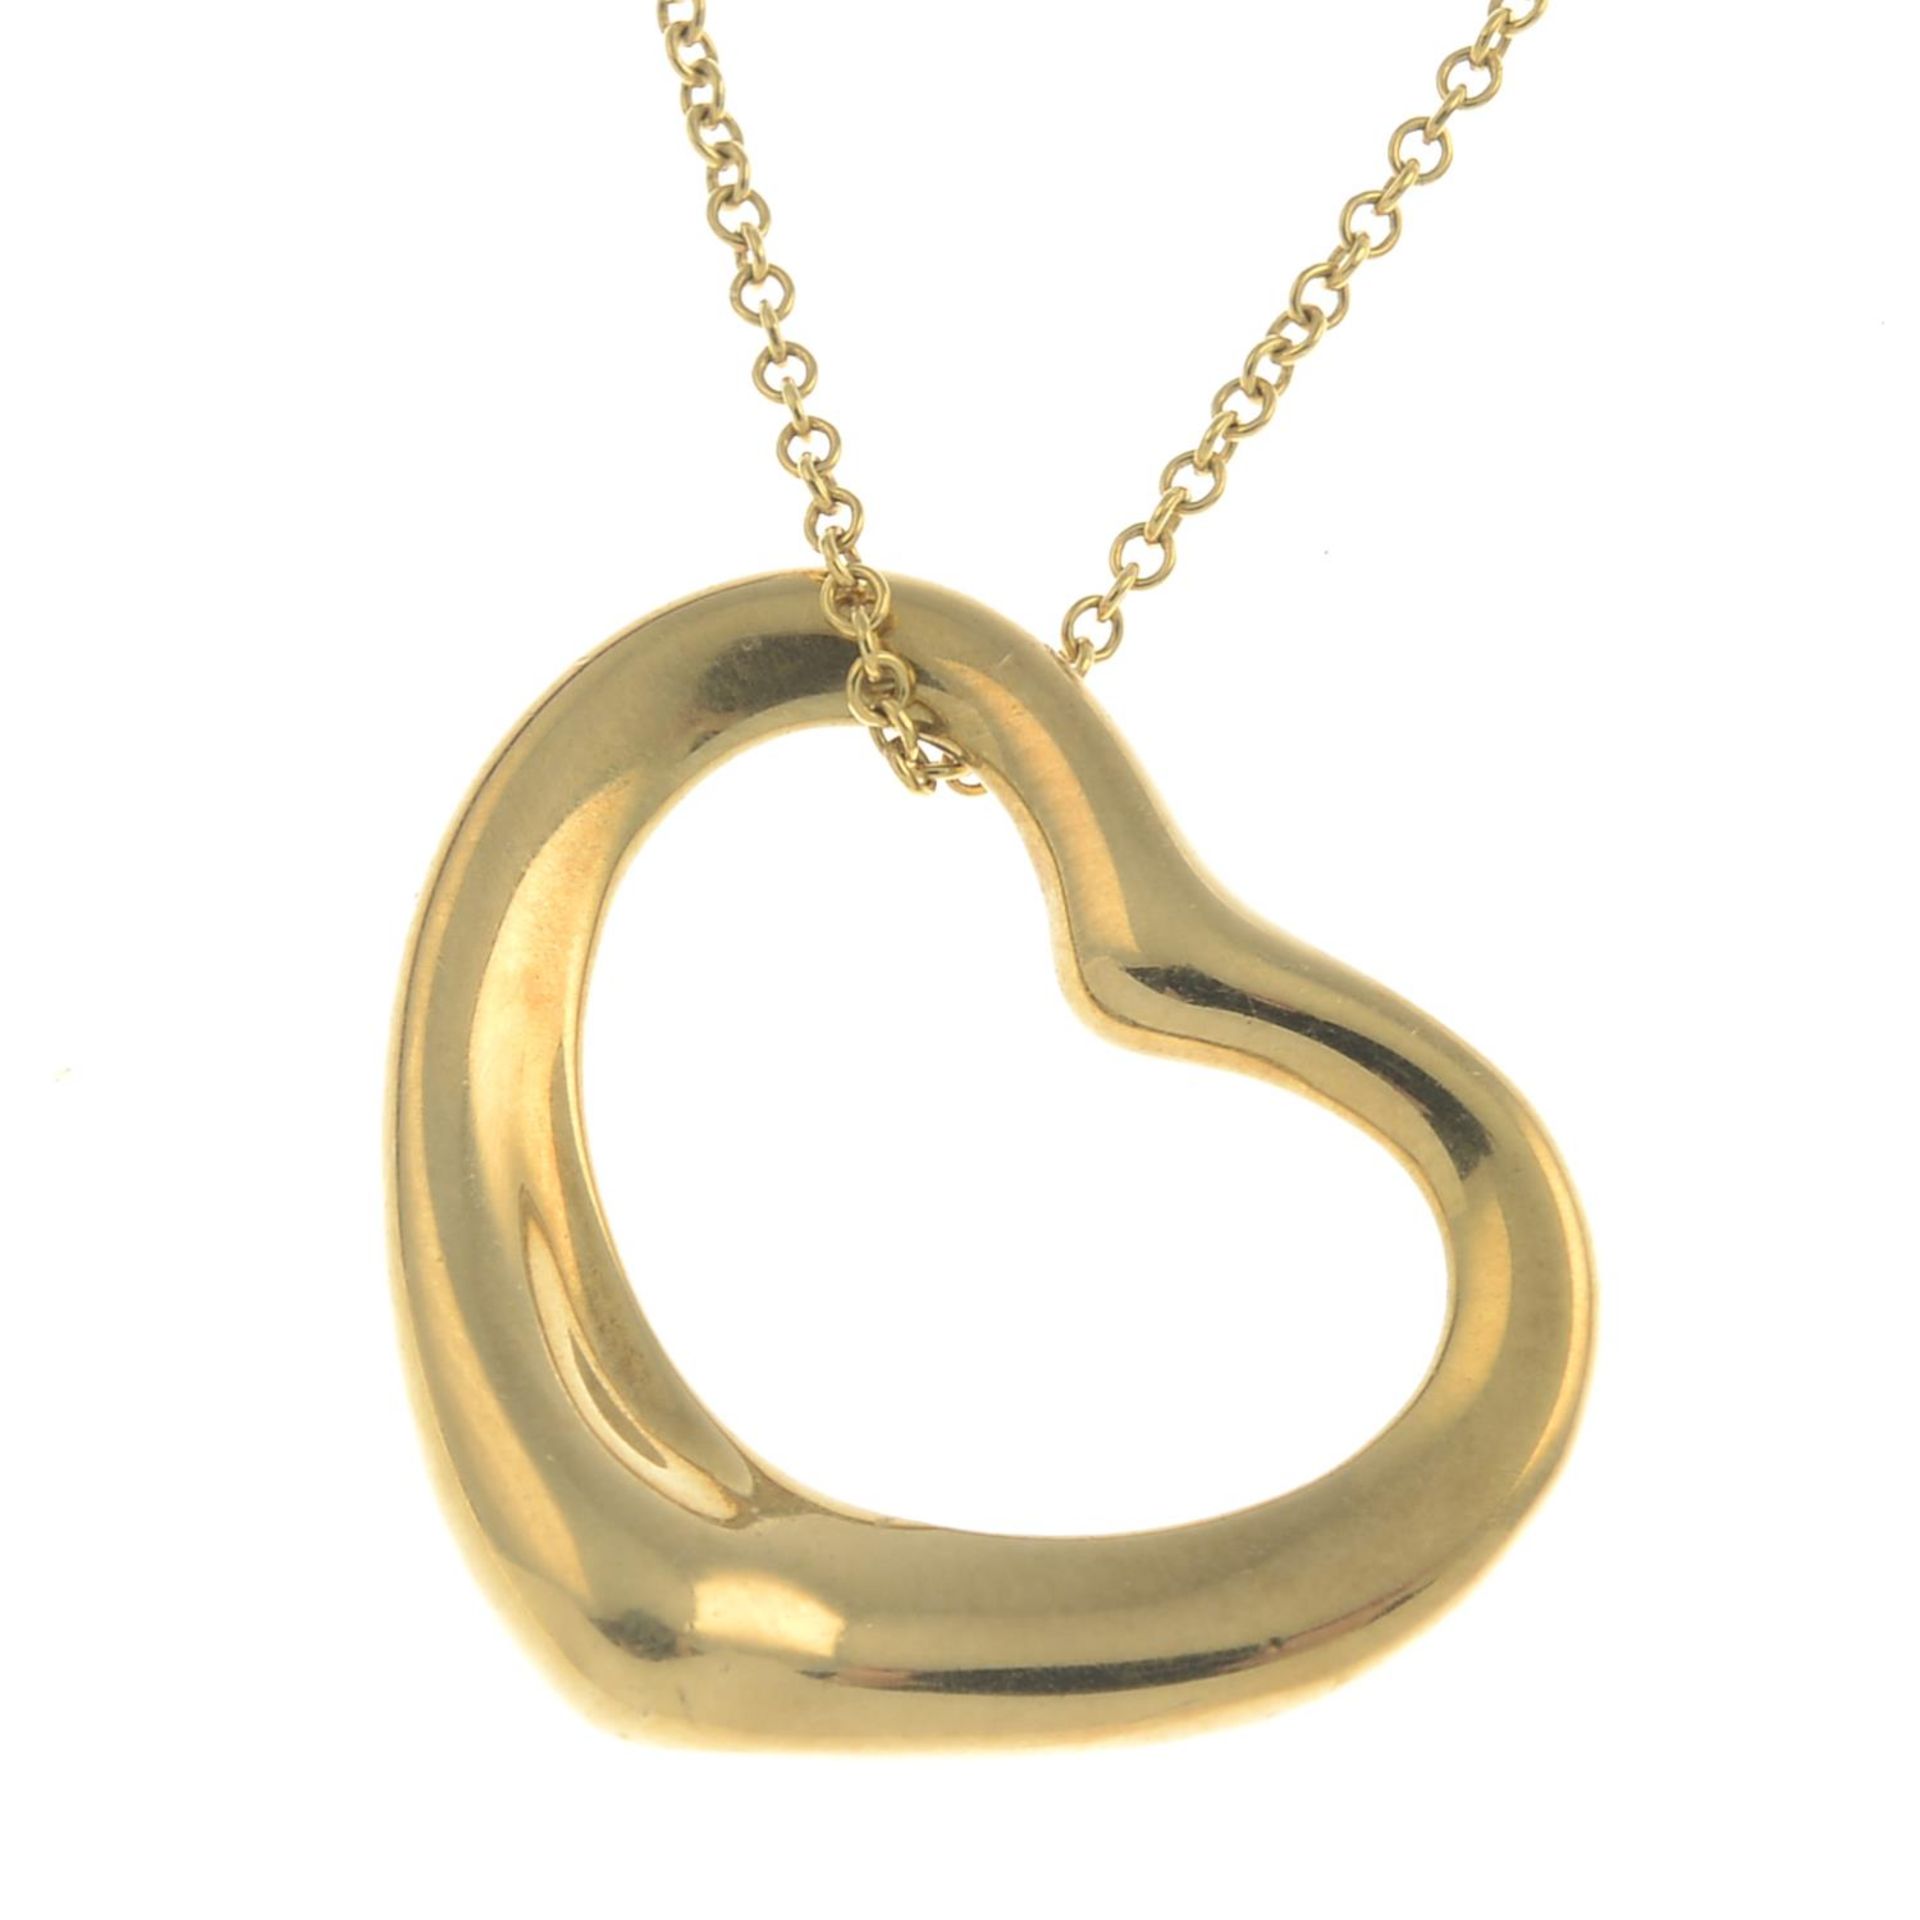 An 'Open Heart' pendant, suspended from a chain, by Elsa Peretti, for Tiffany & Co. - Image 2 of 3